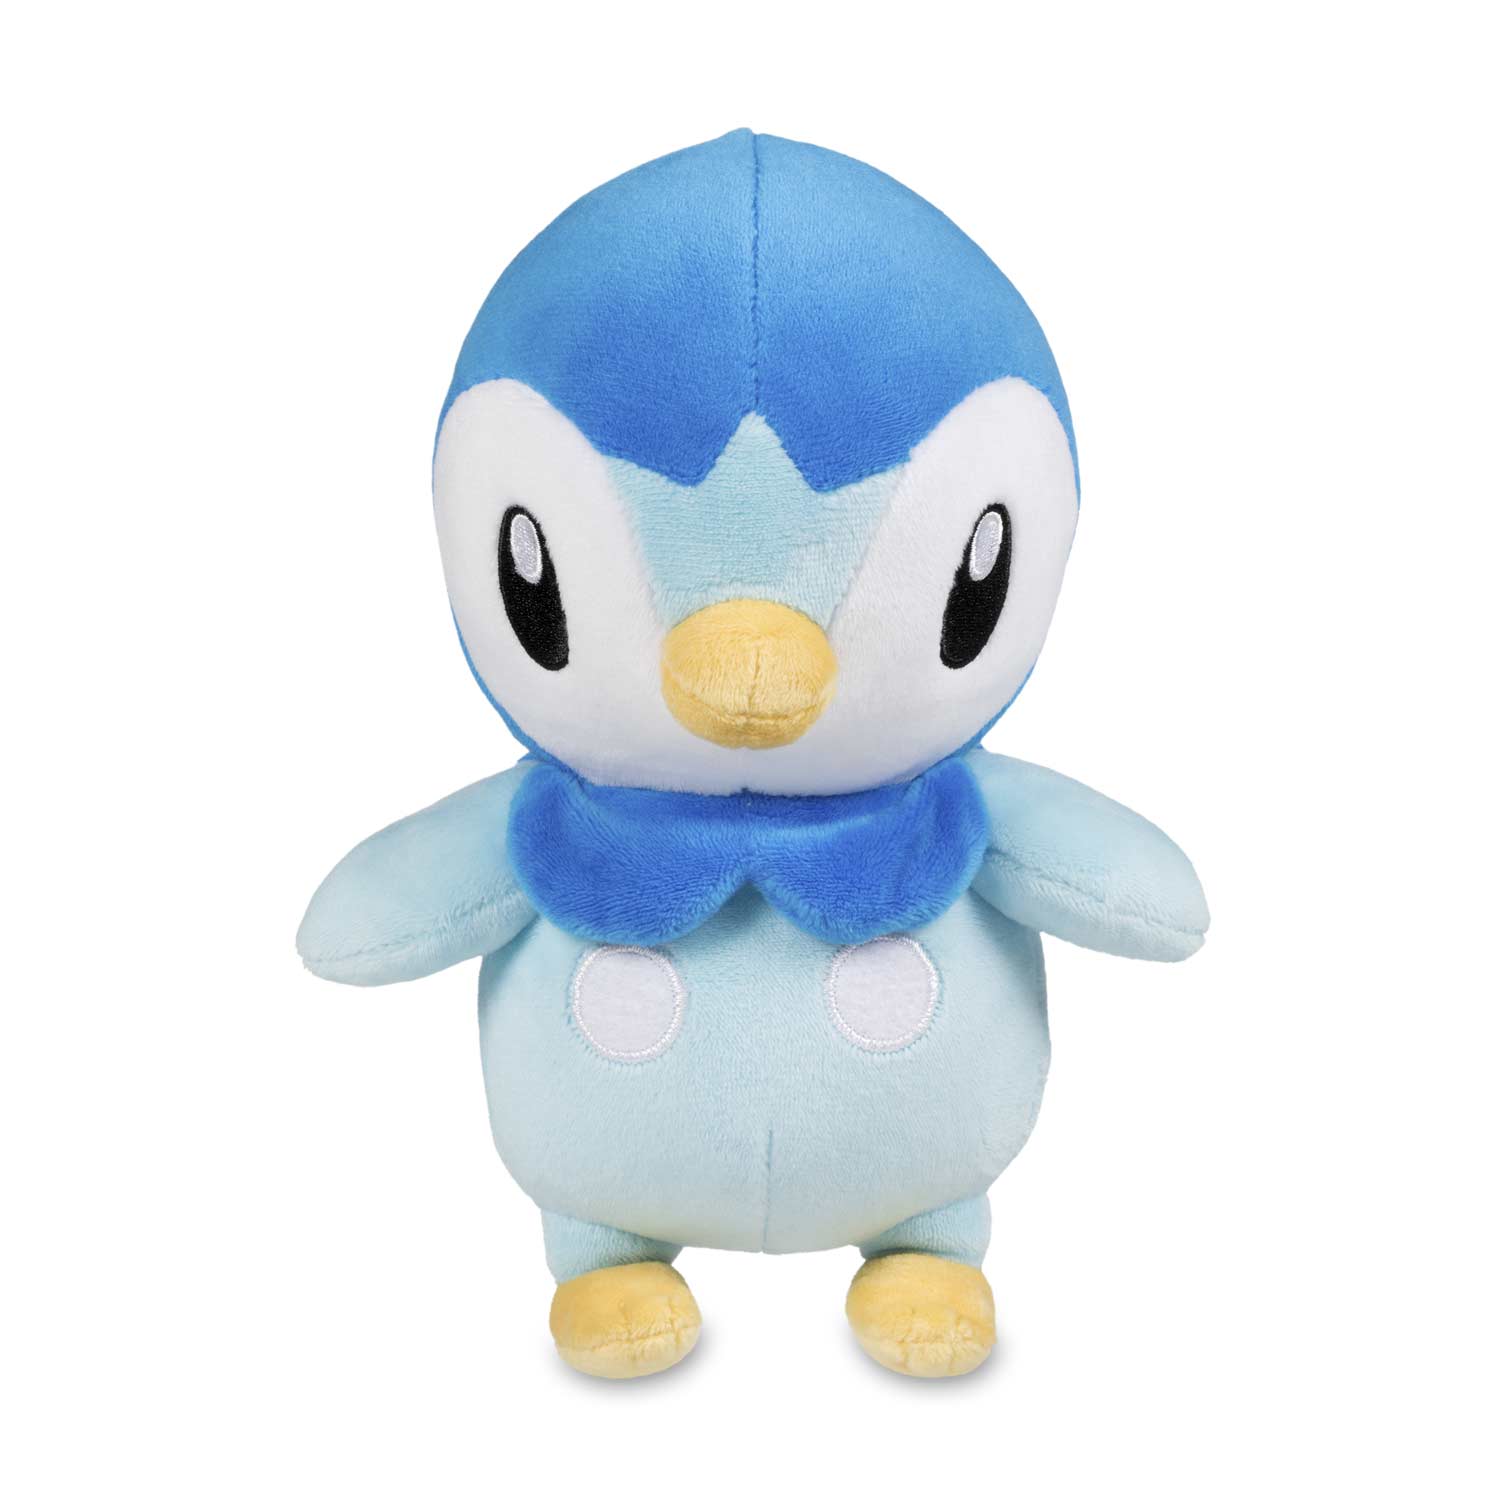 Official Pokemon Company Piplup Plush Stuffed Doll Toy Gift 8" 